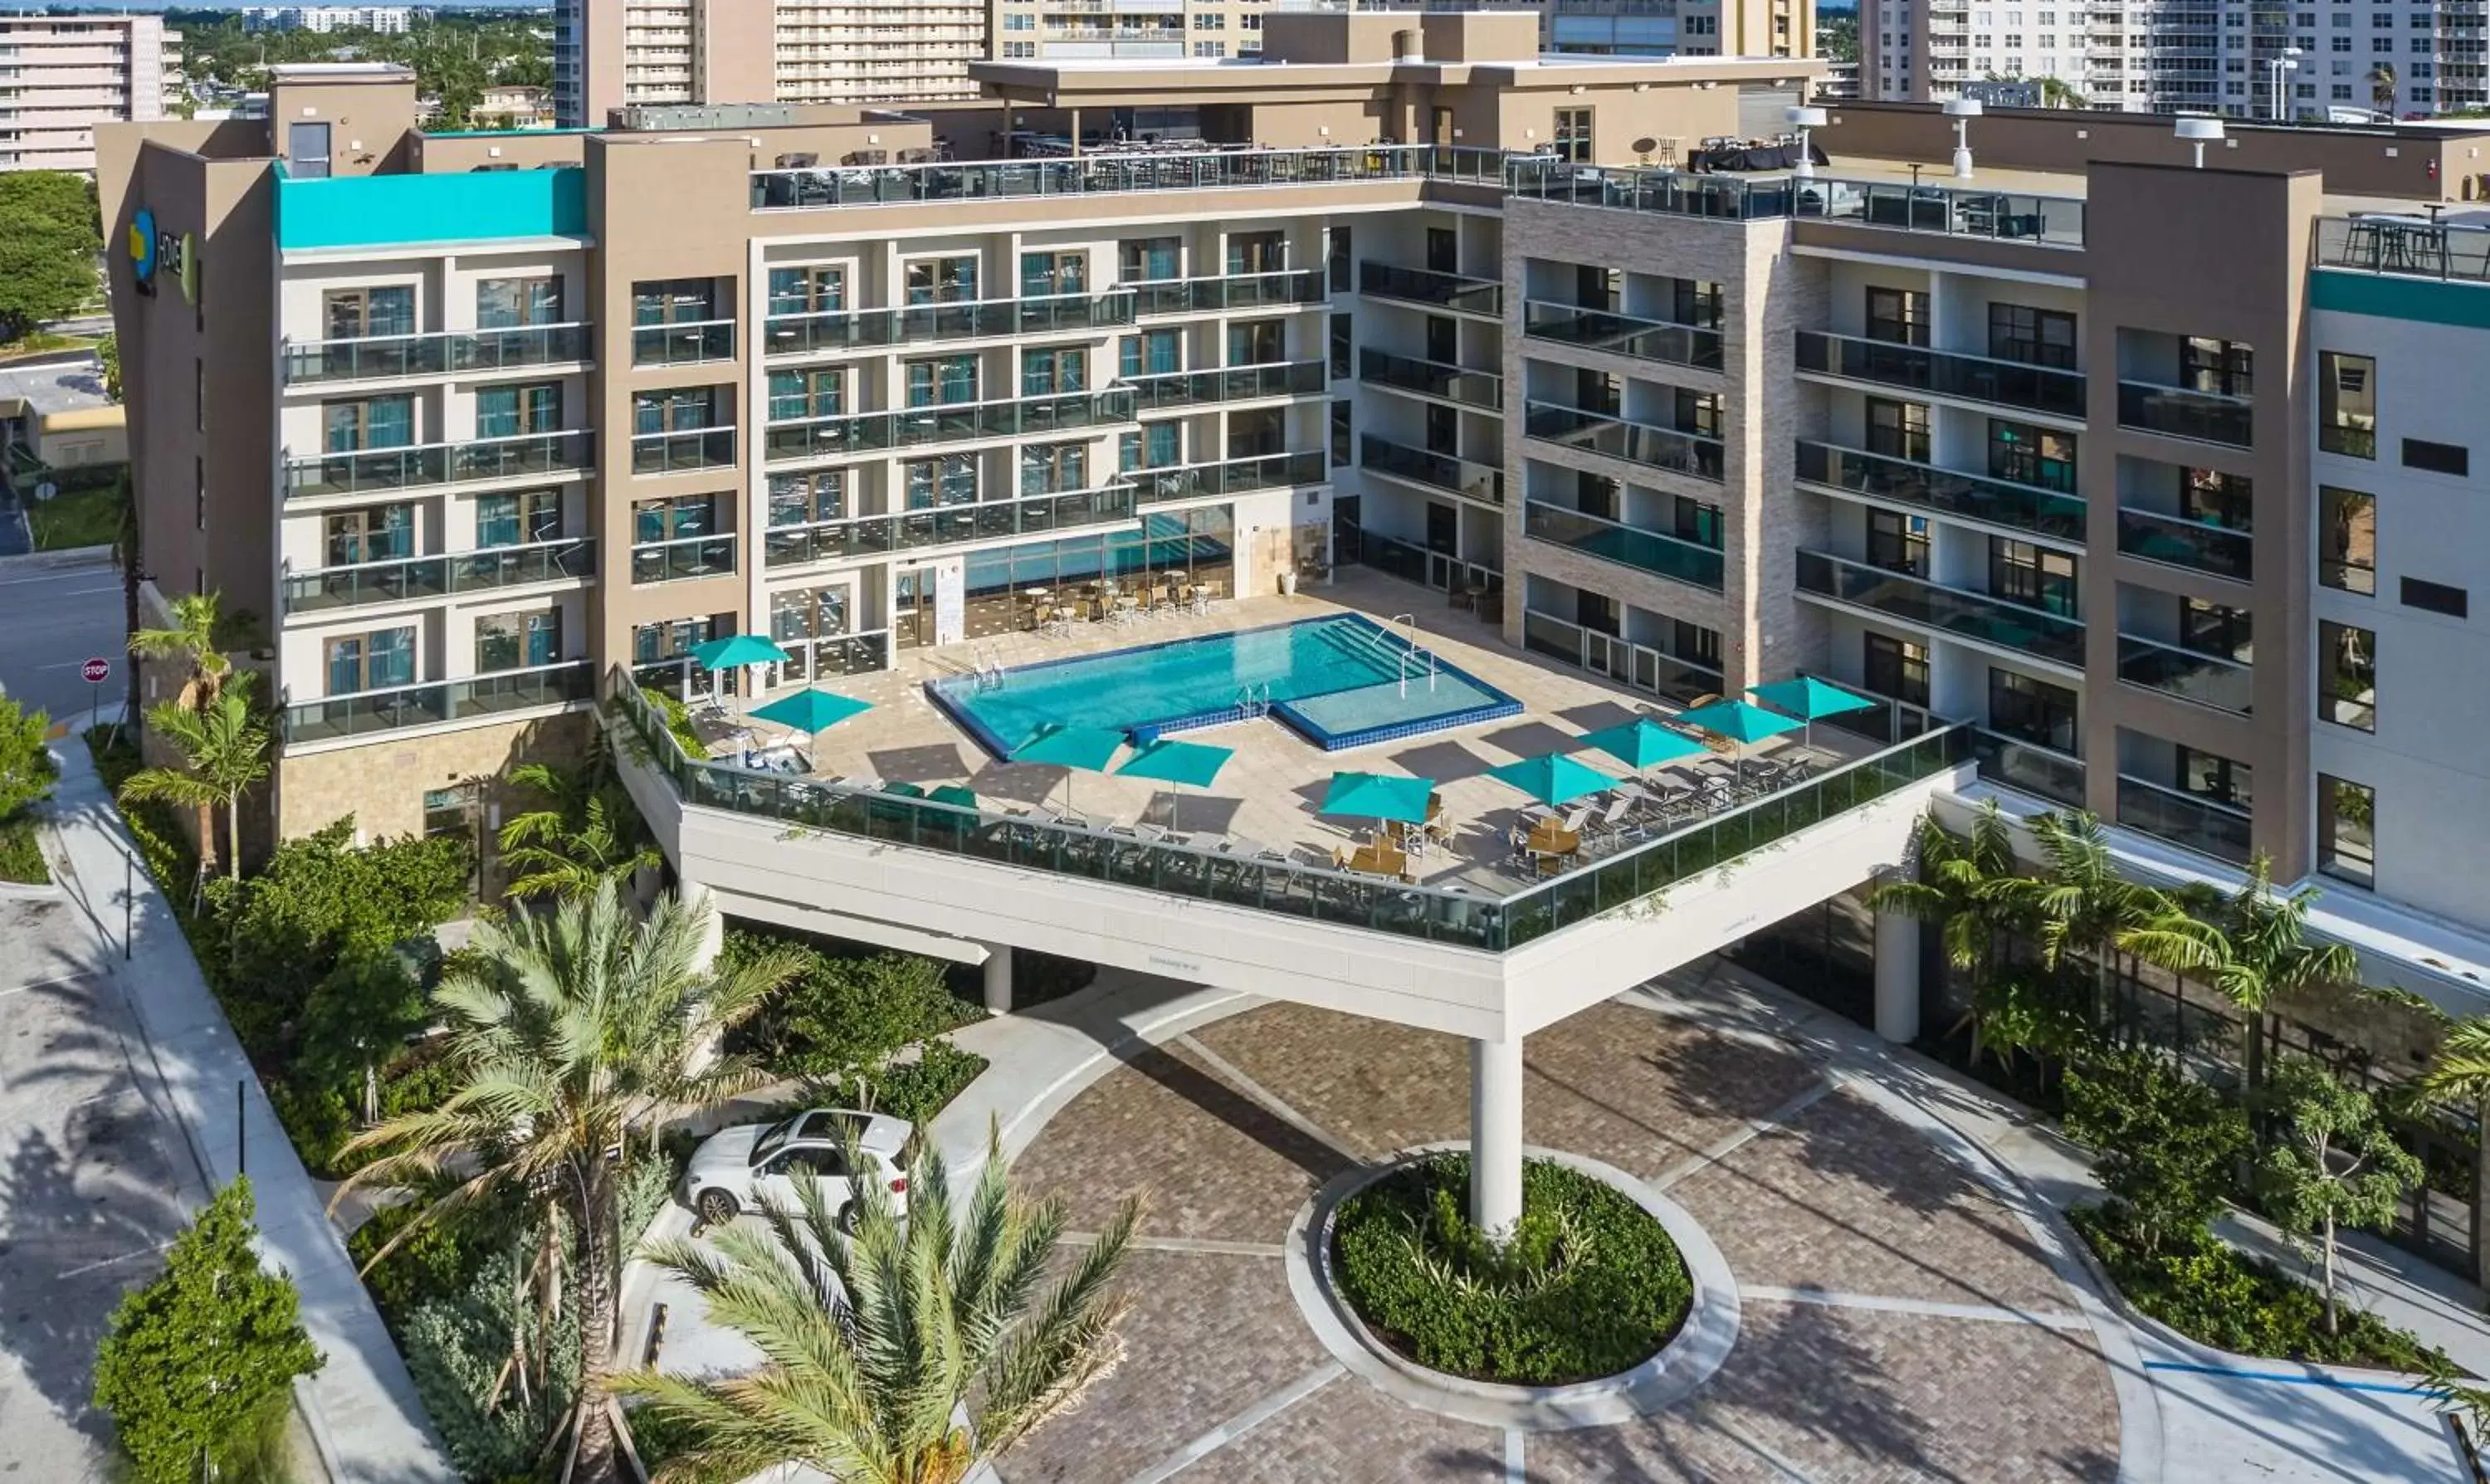 Property building, Pool View in Home2 Suites By Hilton Pompano Beach Pier, Fl